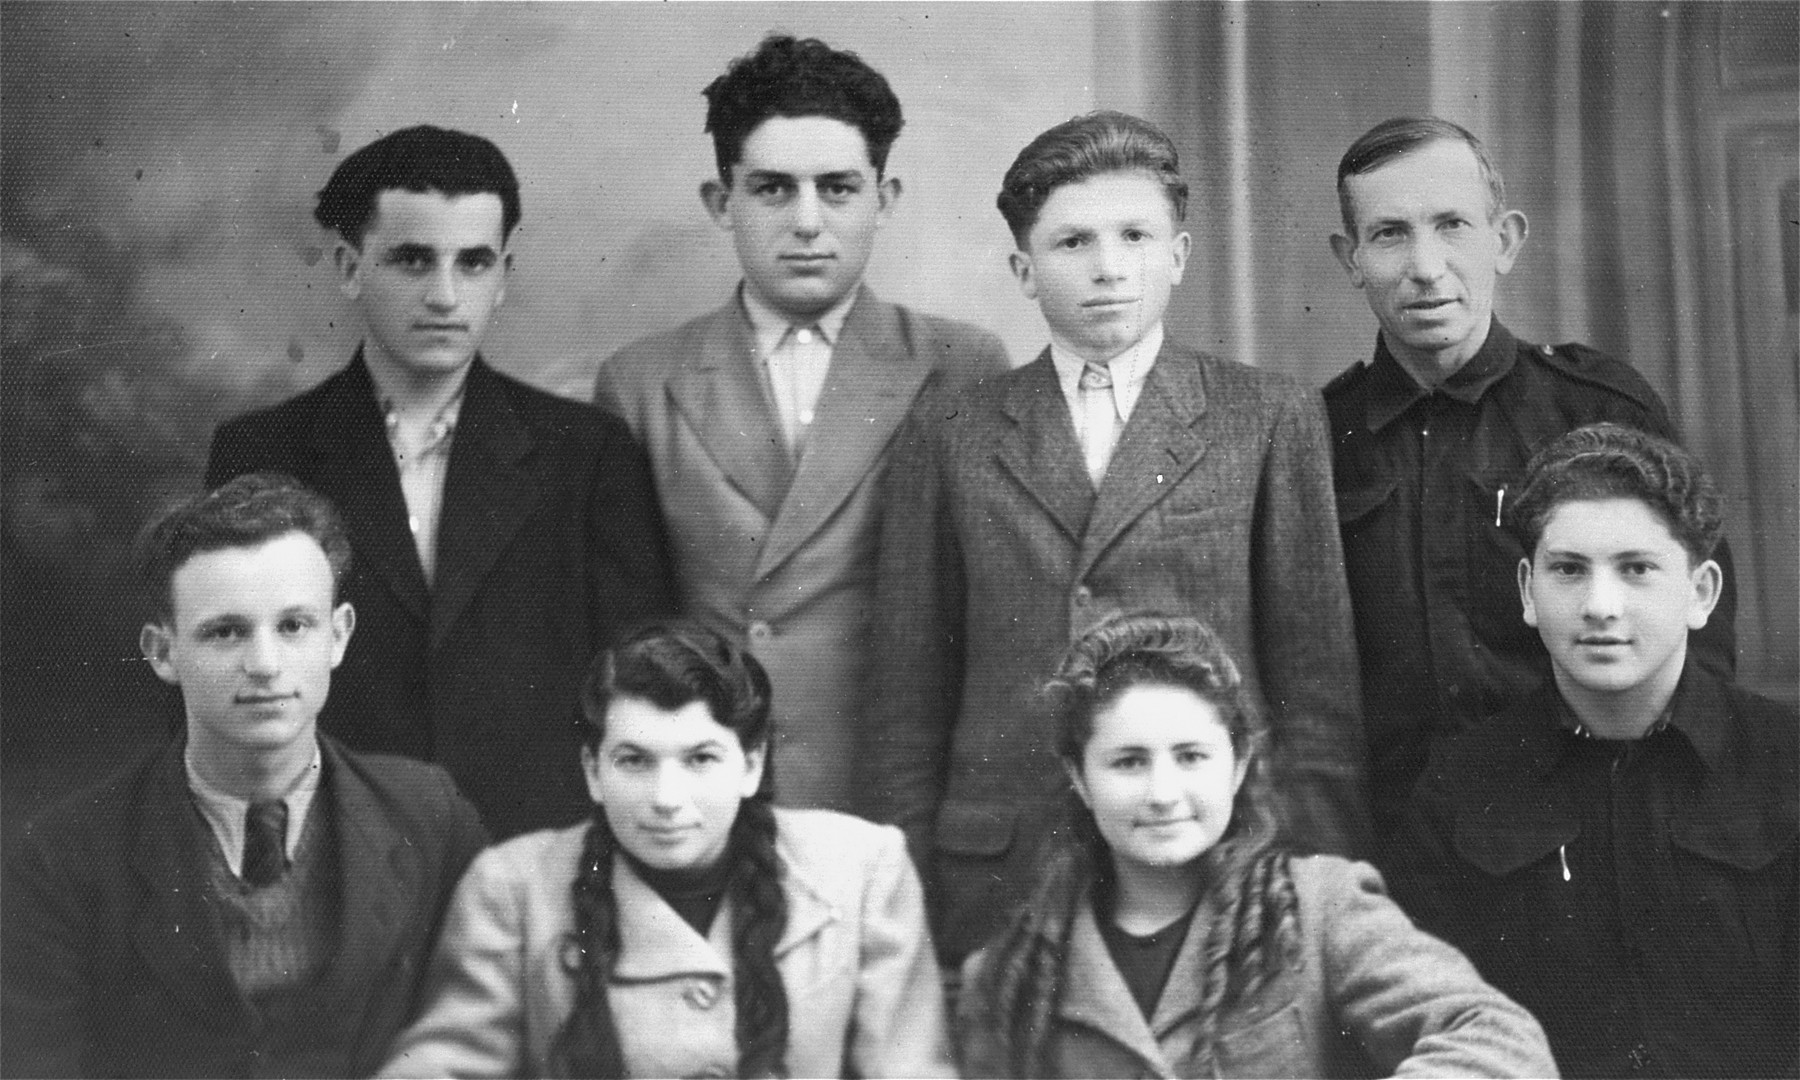 Group portrait of Jewish DP youth in Kolbuszowa.

Among those pictured is Manius Notowicz (front row, right) and Markus Rohtbart (top row, right).